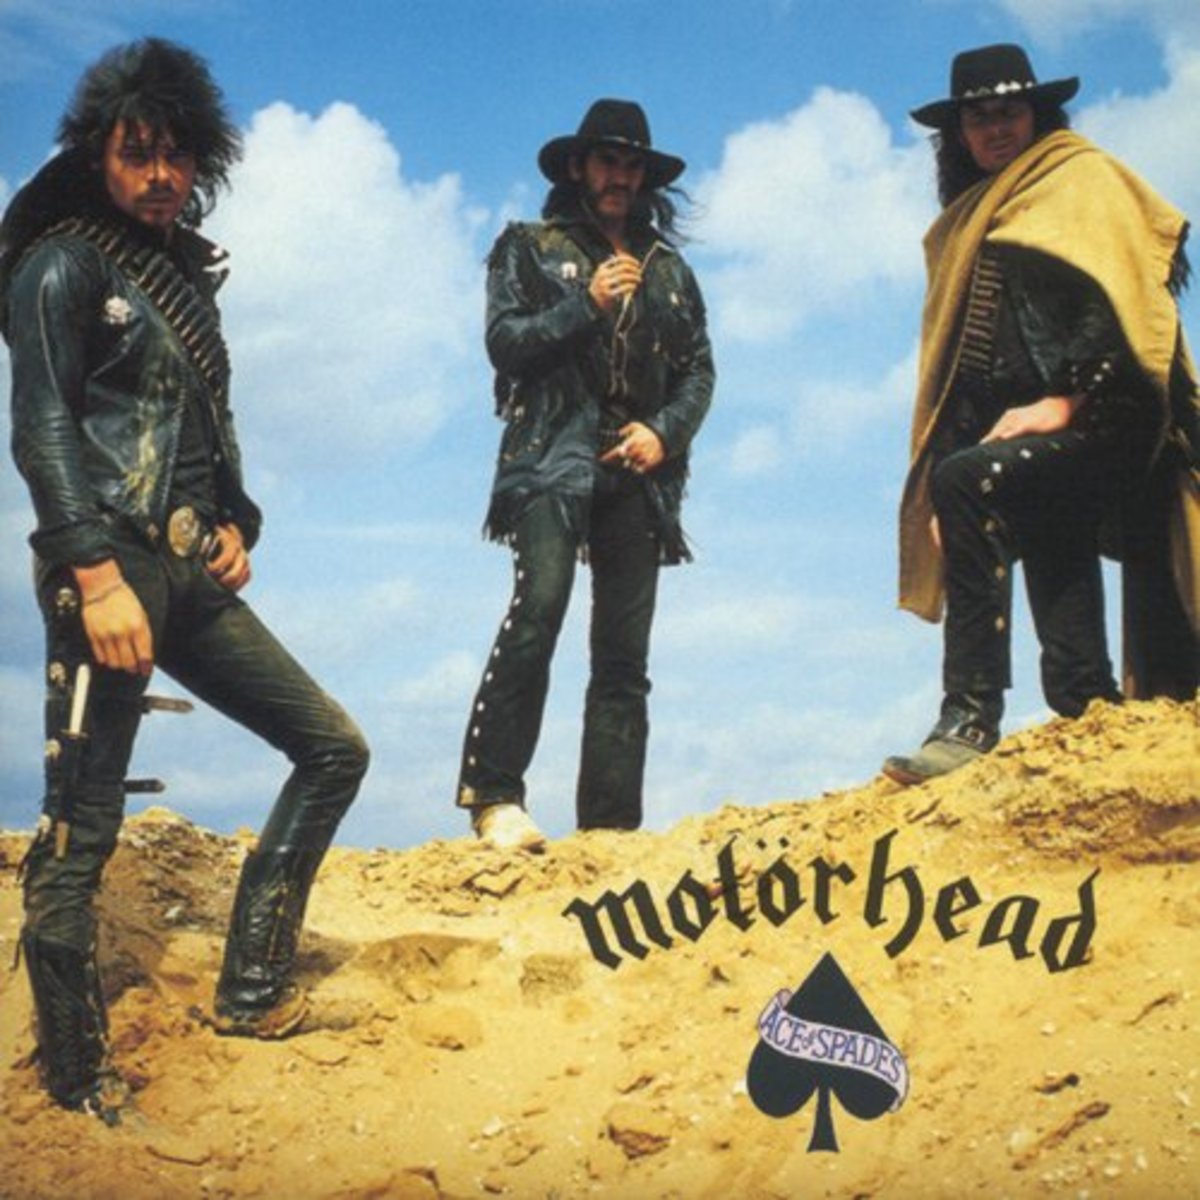 25-greatest-hard-rock-and-heavy-metal-album-covers